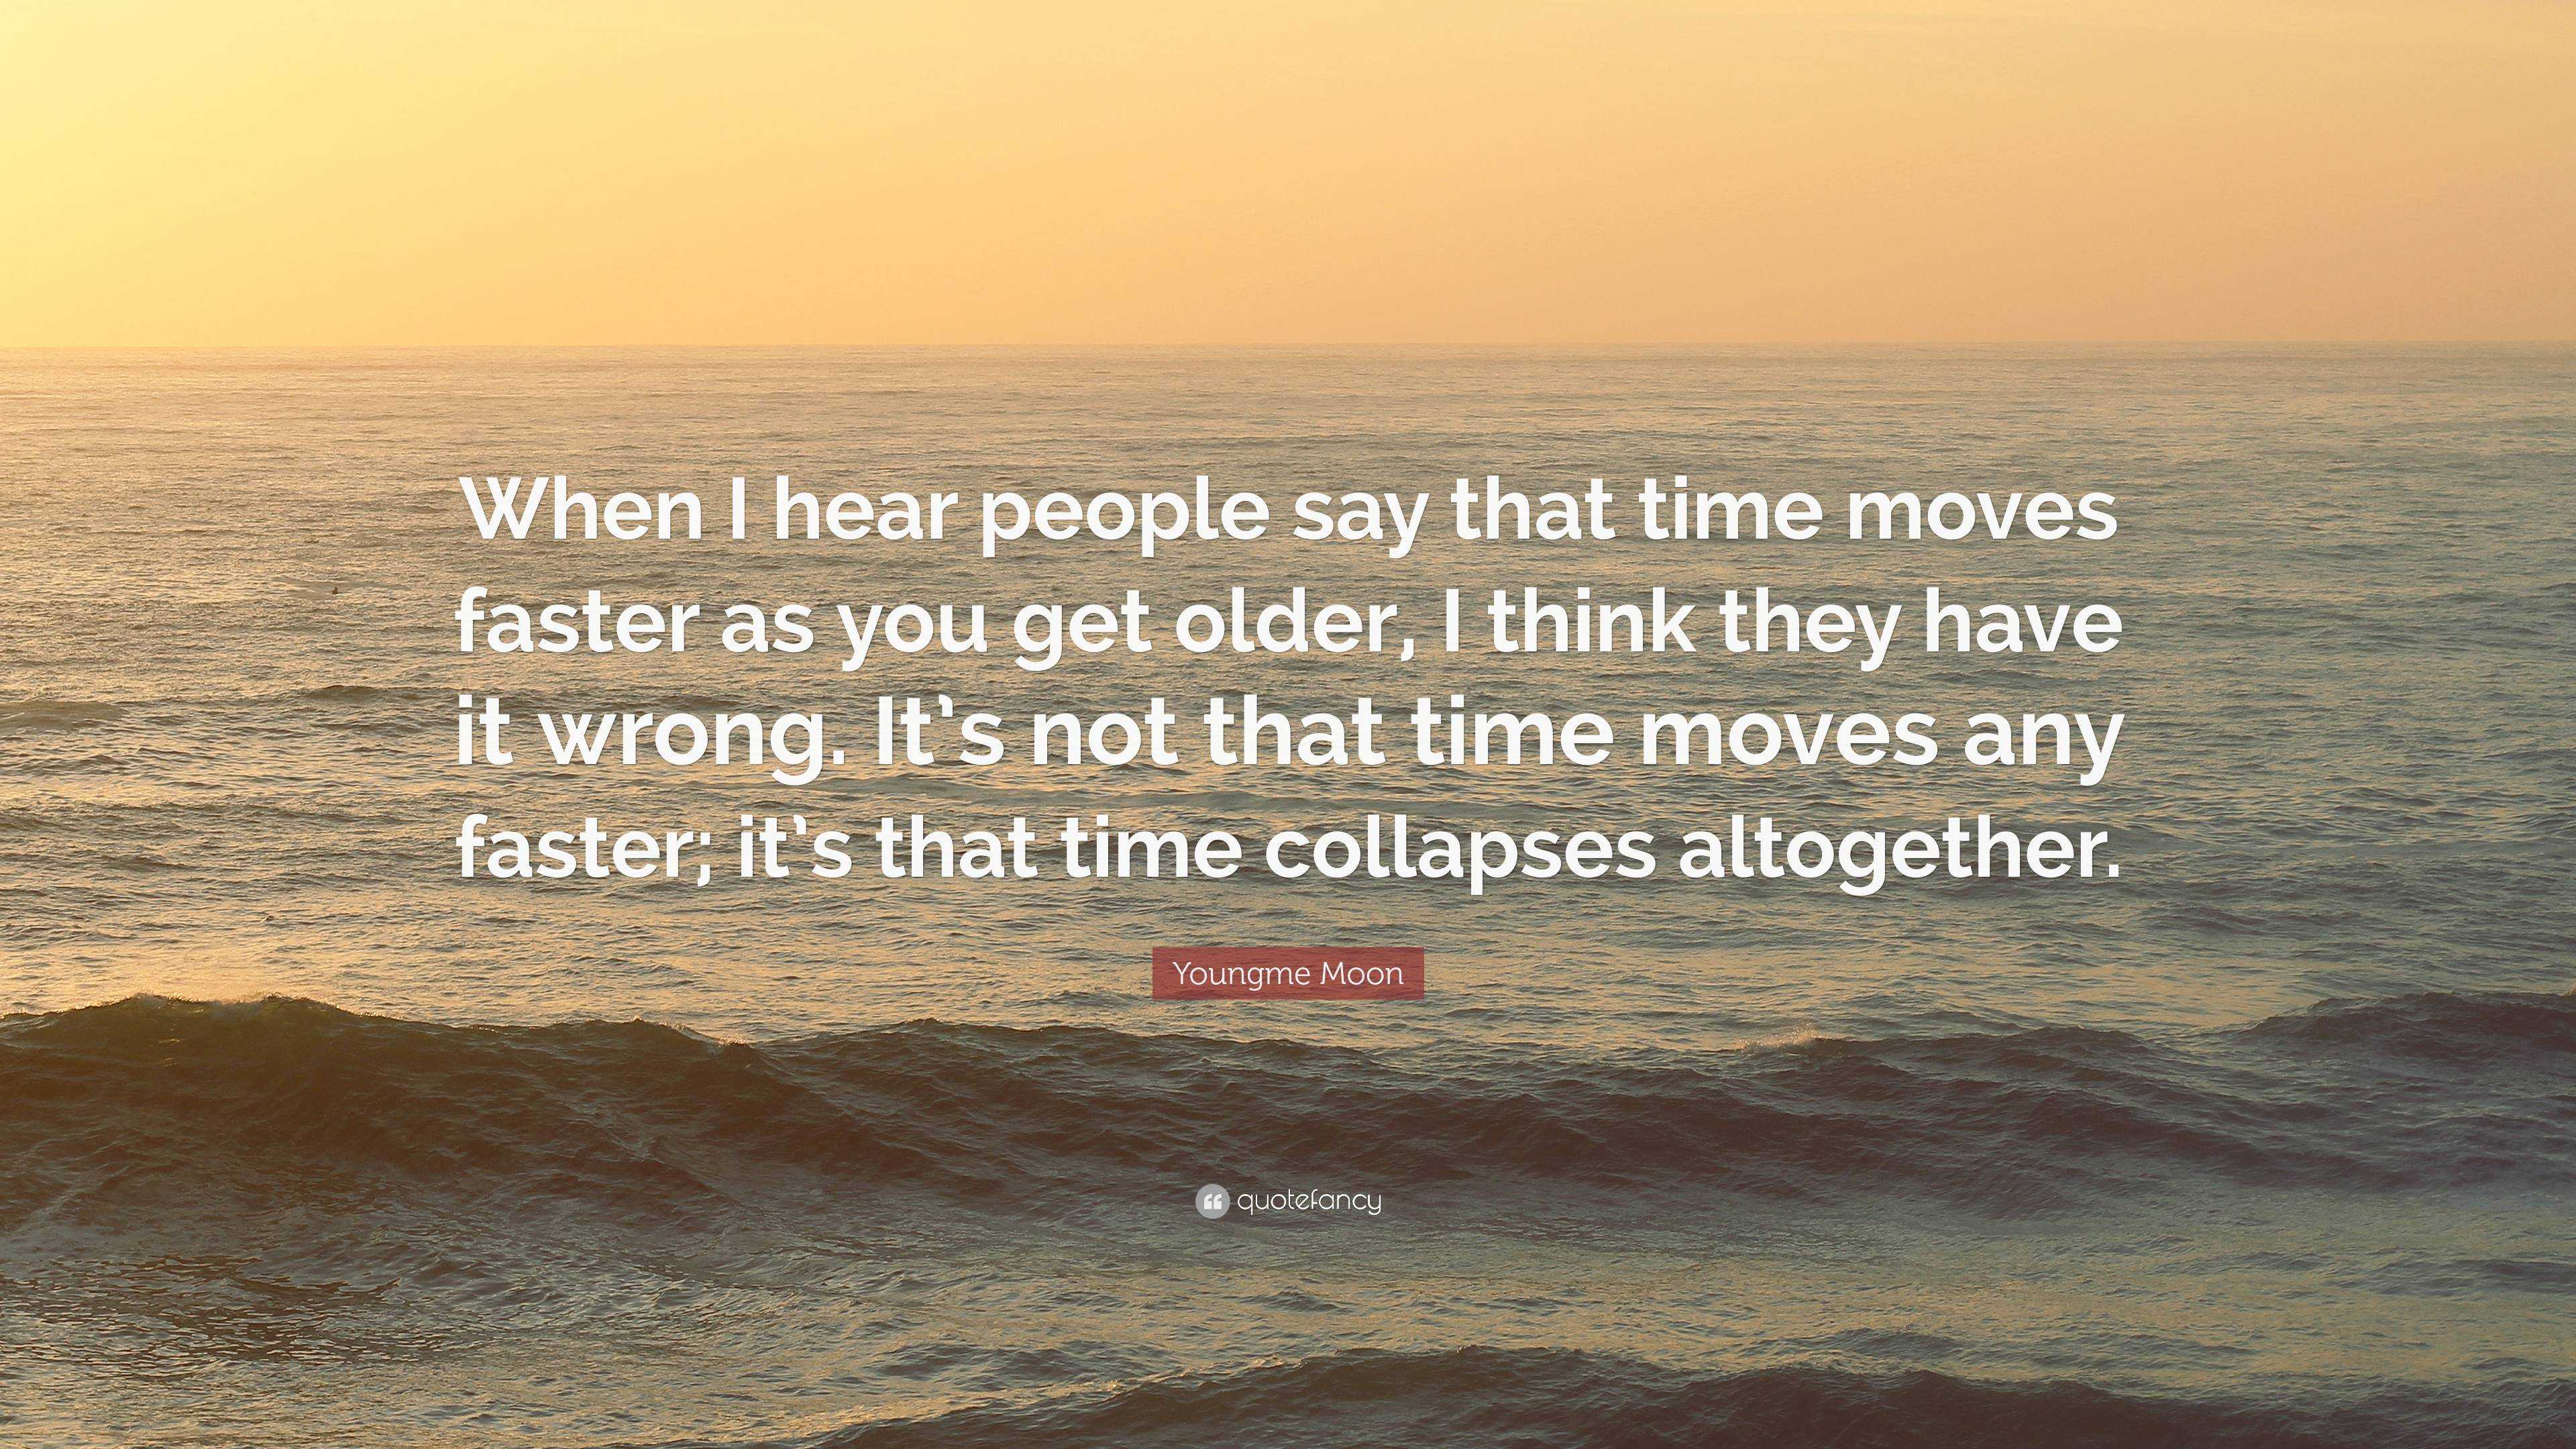 Youngme Moon Quote: “When I hear people say that time moves faster as ...